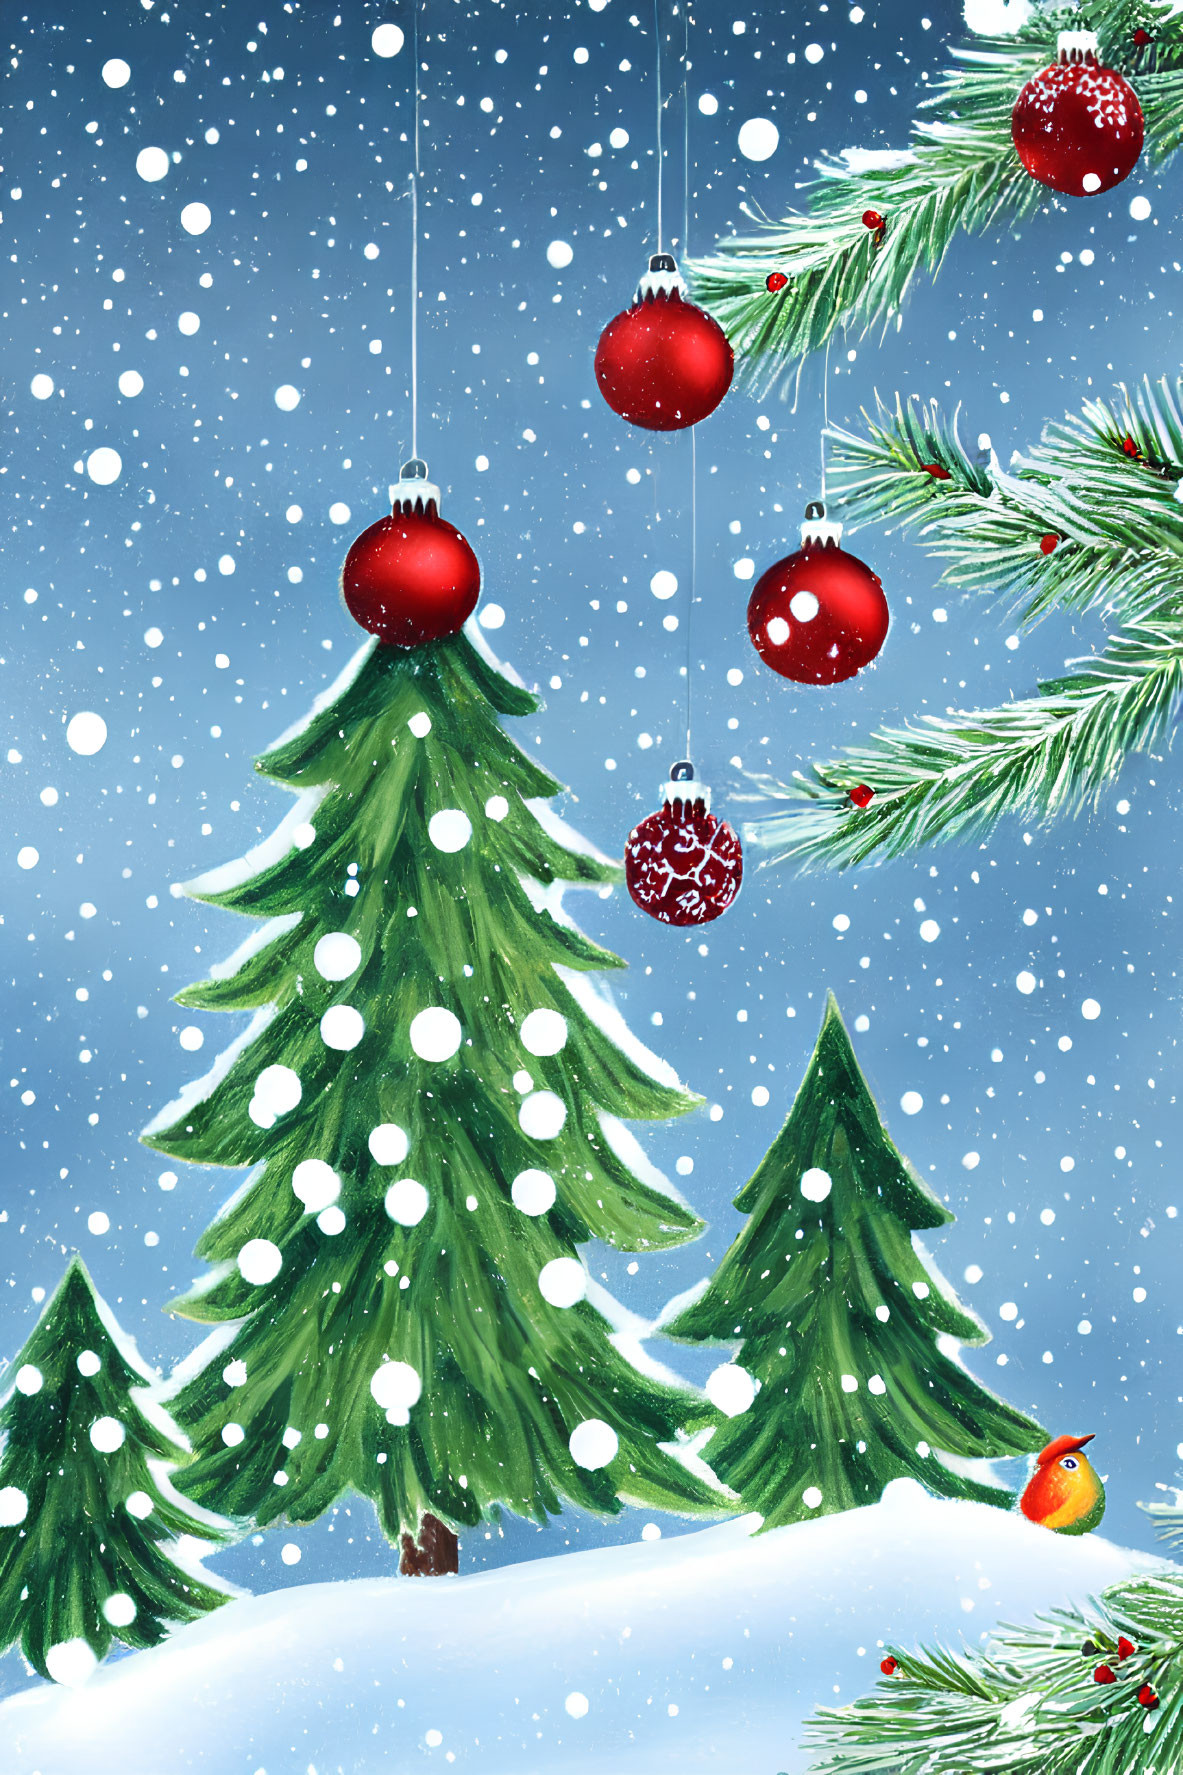 Winter scene with evergreen trees, red baubles, bird, and snowflakes